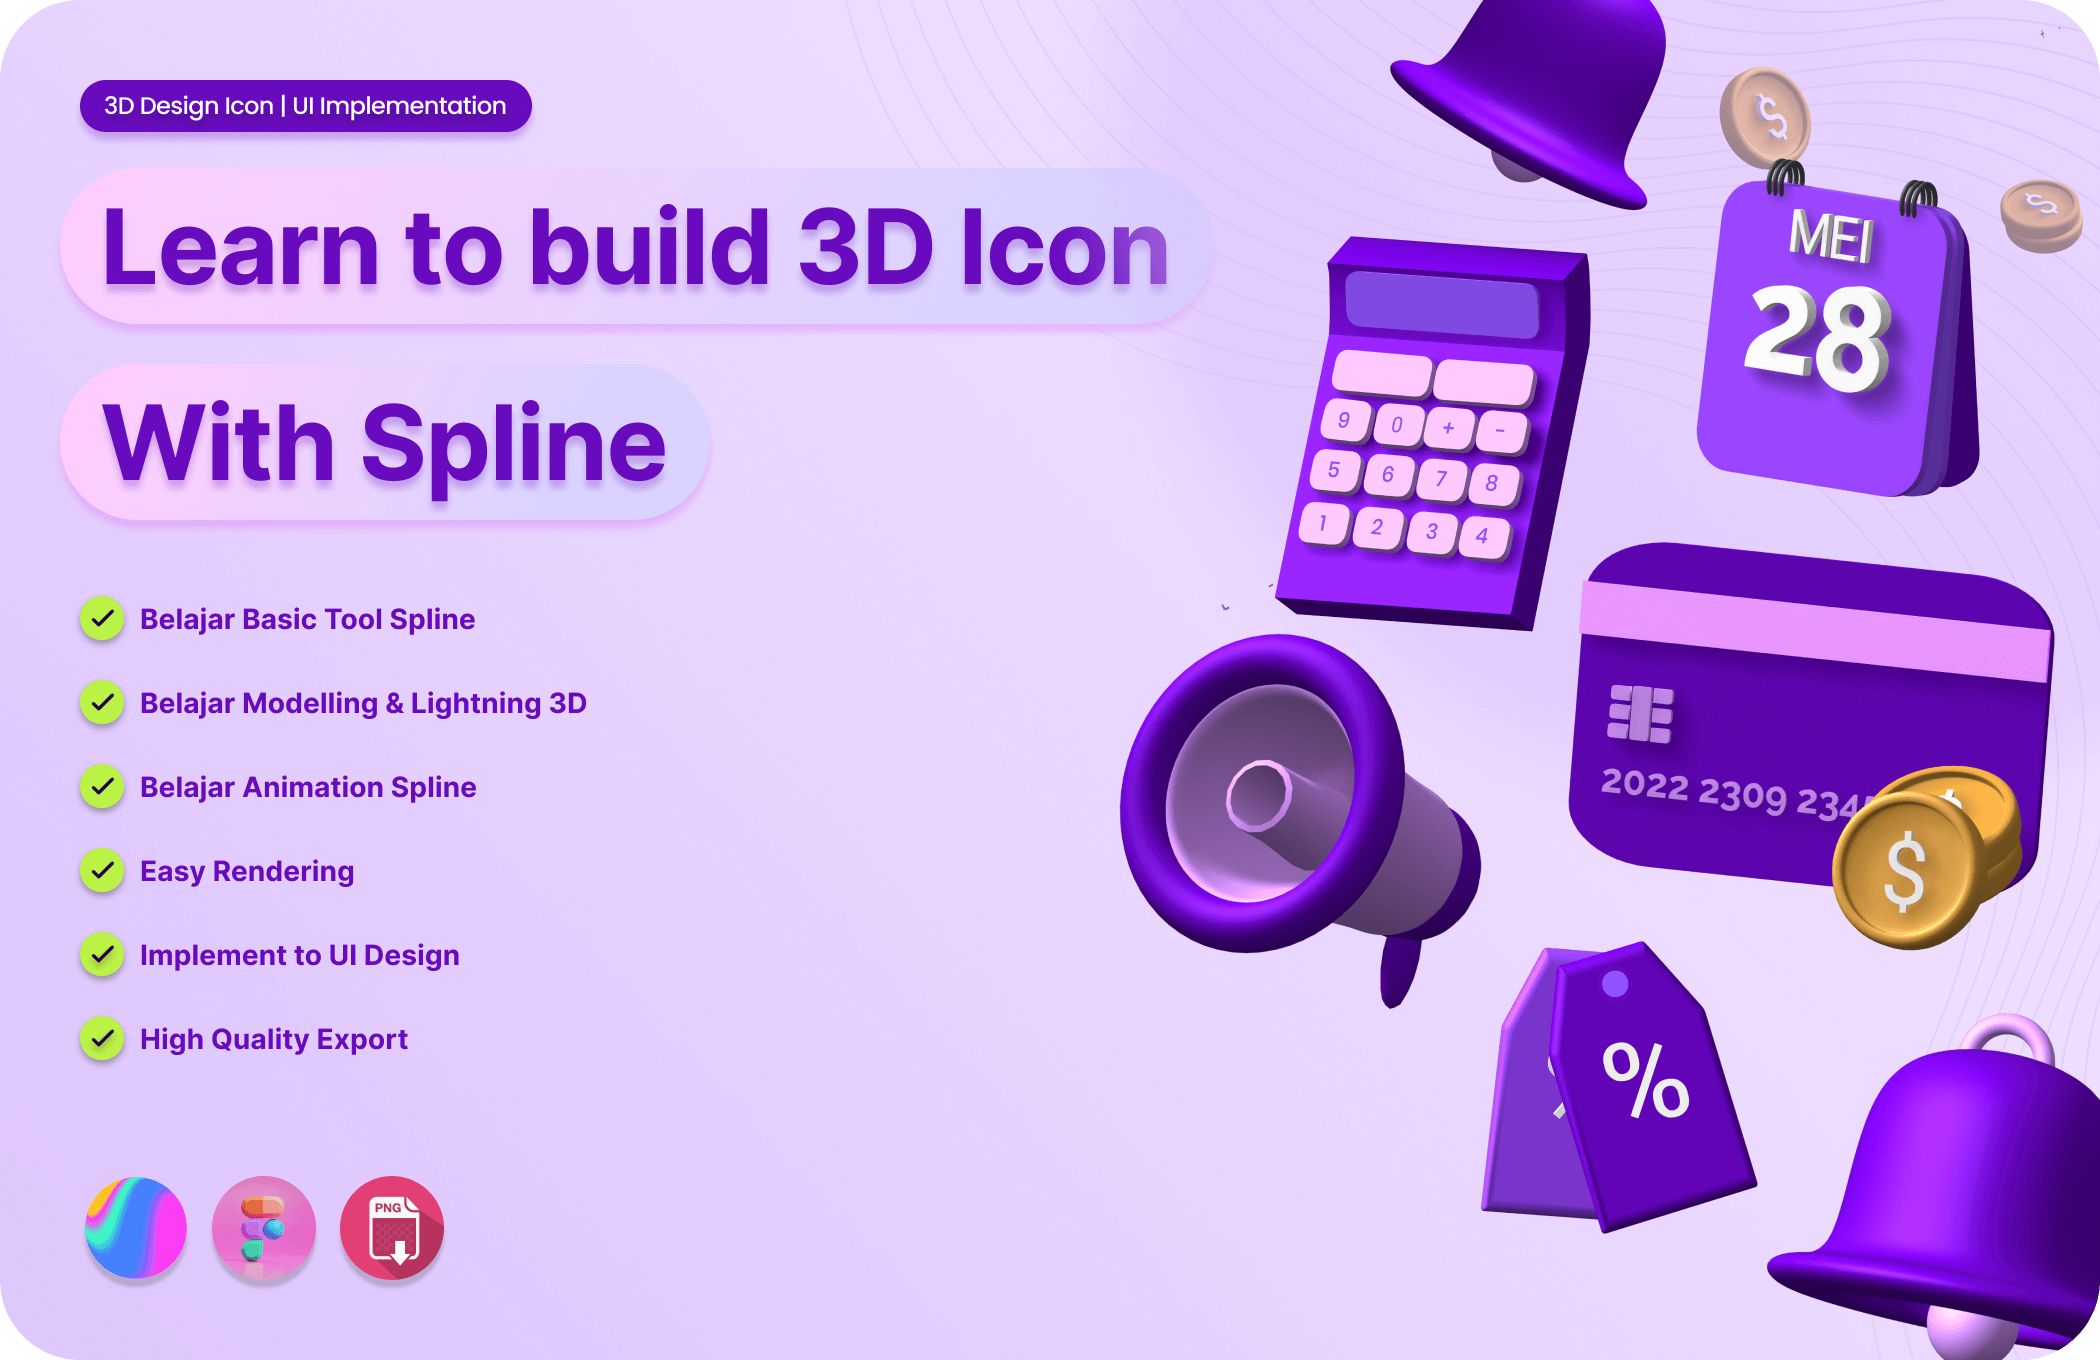 Kelas Learn to build a 3D Icon with Spline for UI Implementation di BuildWithAngga